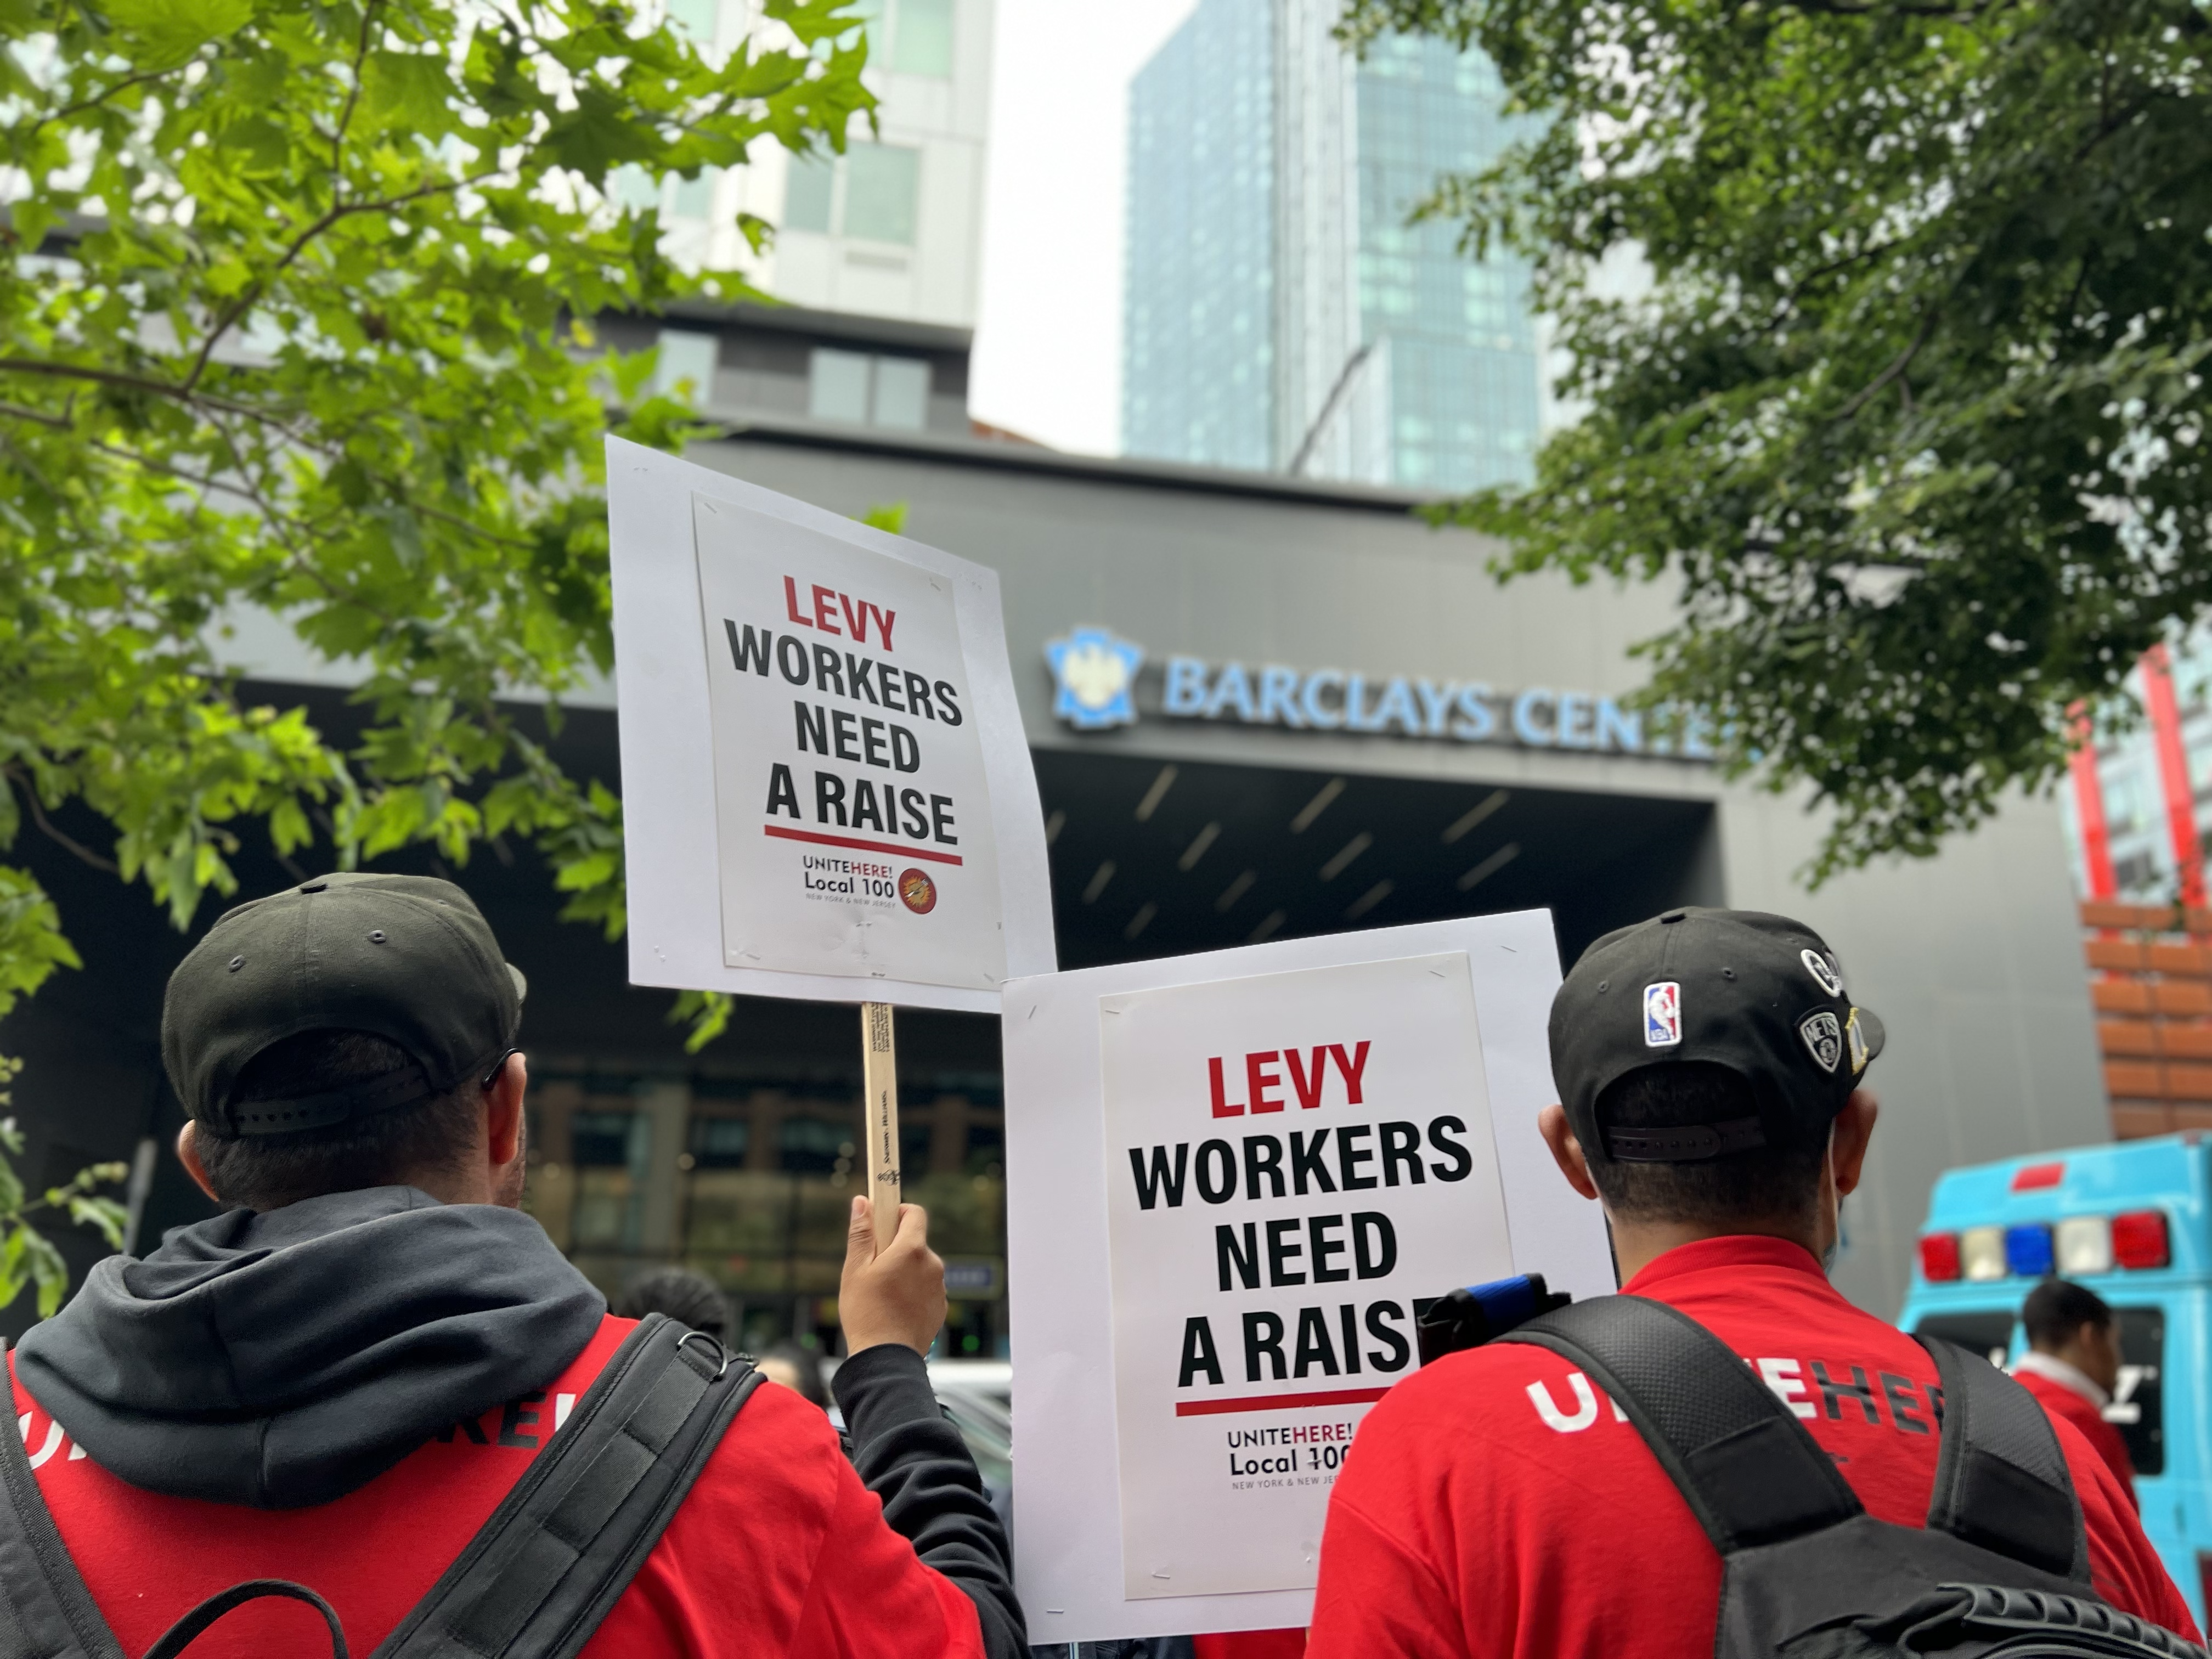 Levy workers rally at Barclays Center